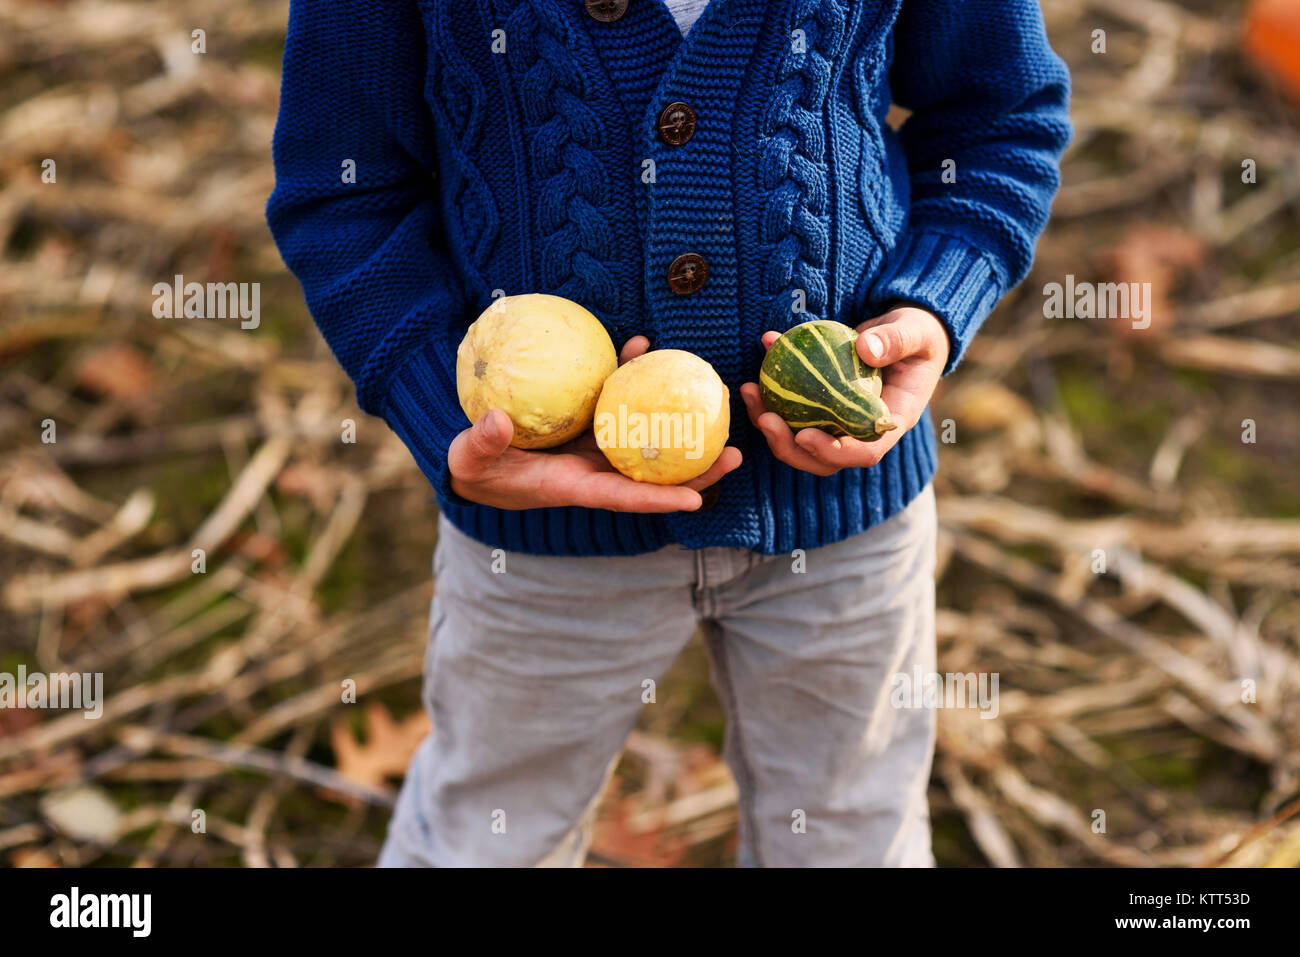 Boy standing in a field holding autumn squash Stock Photo